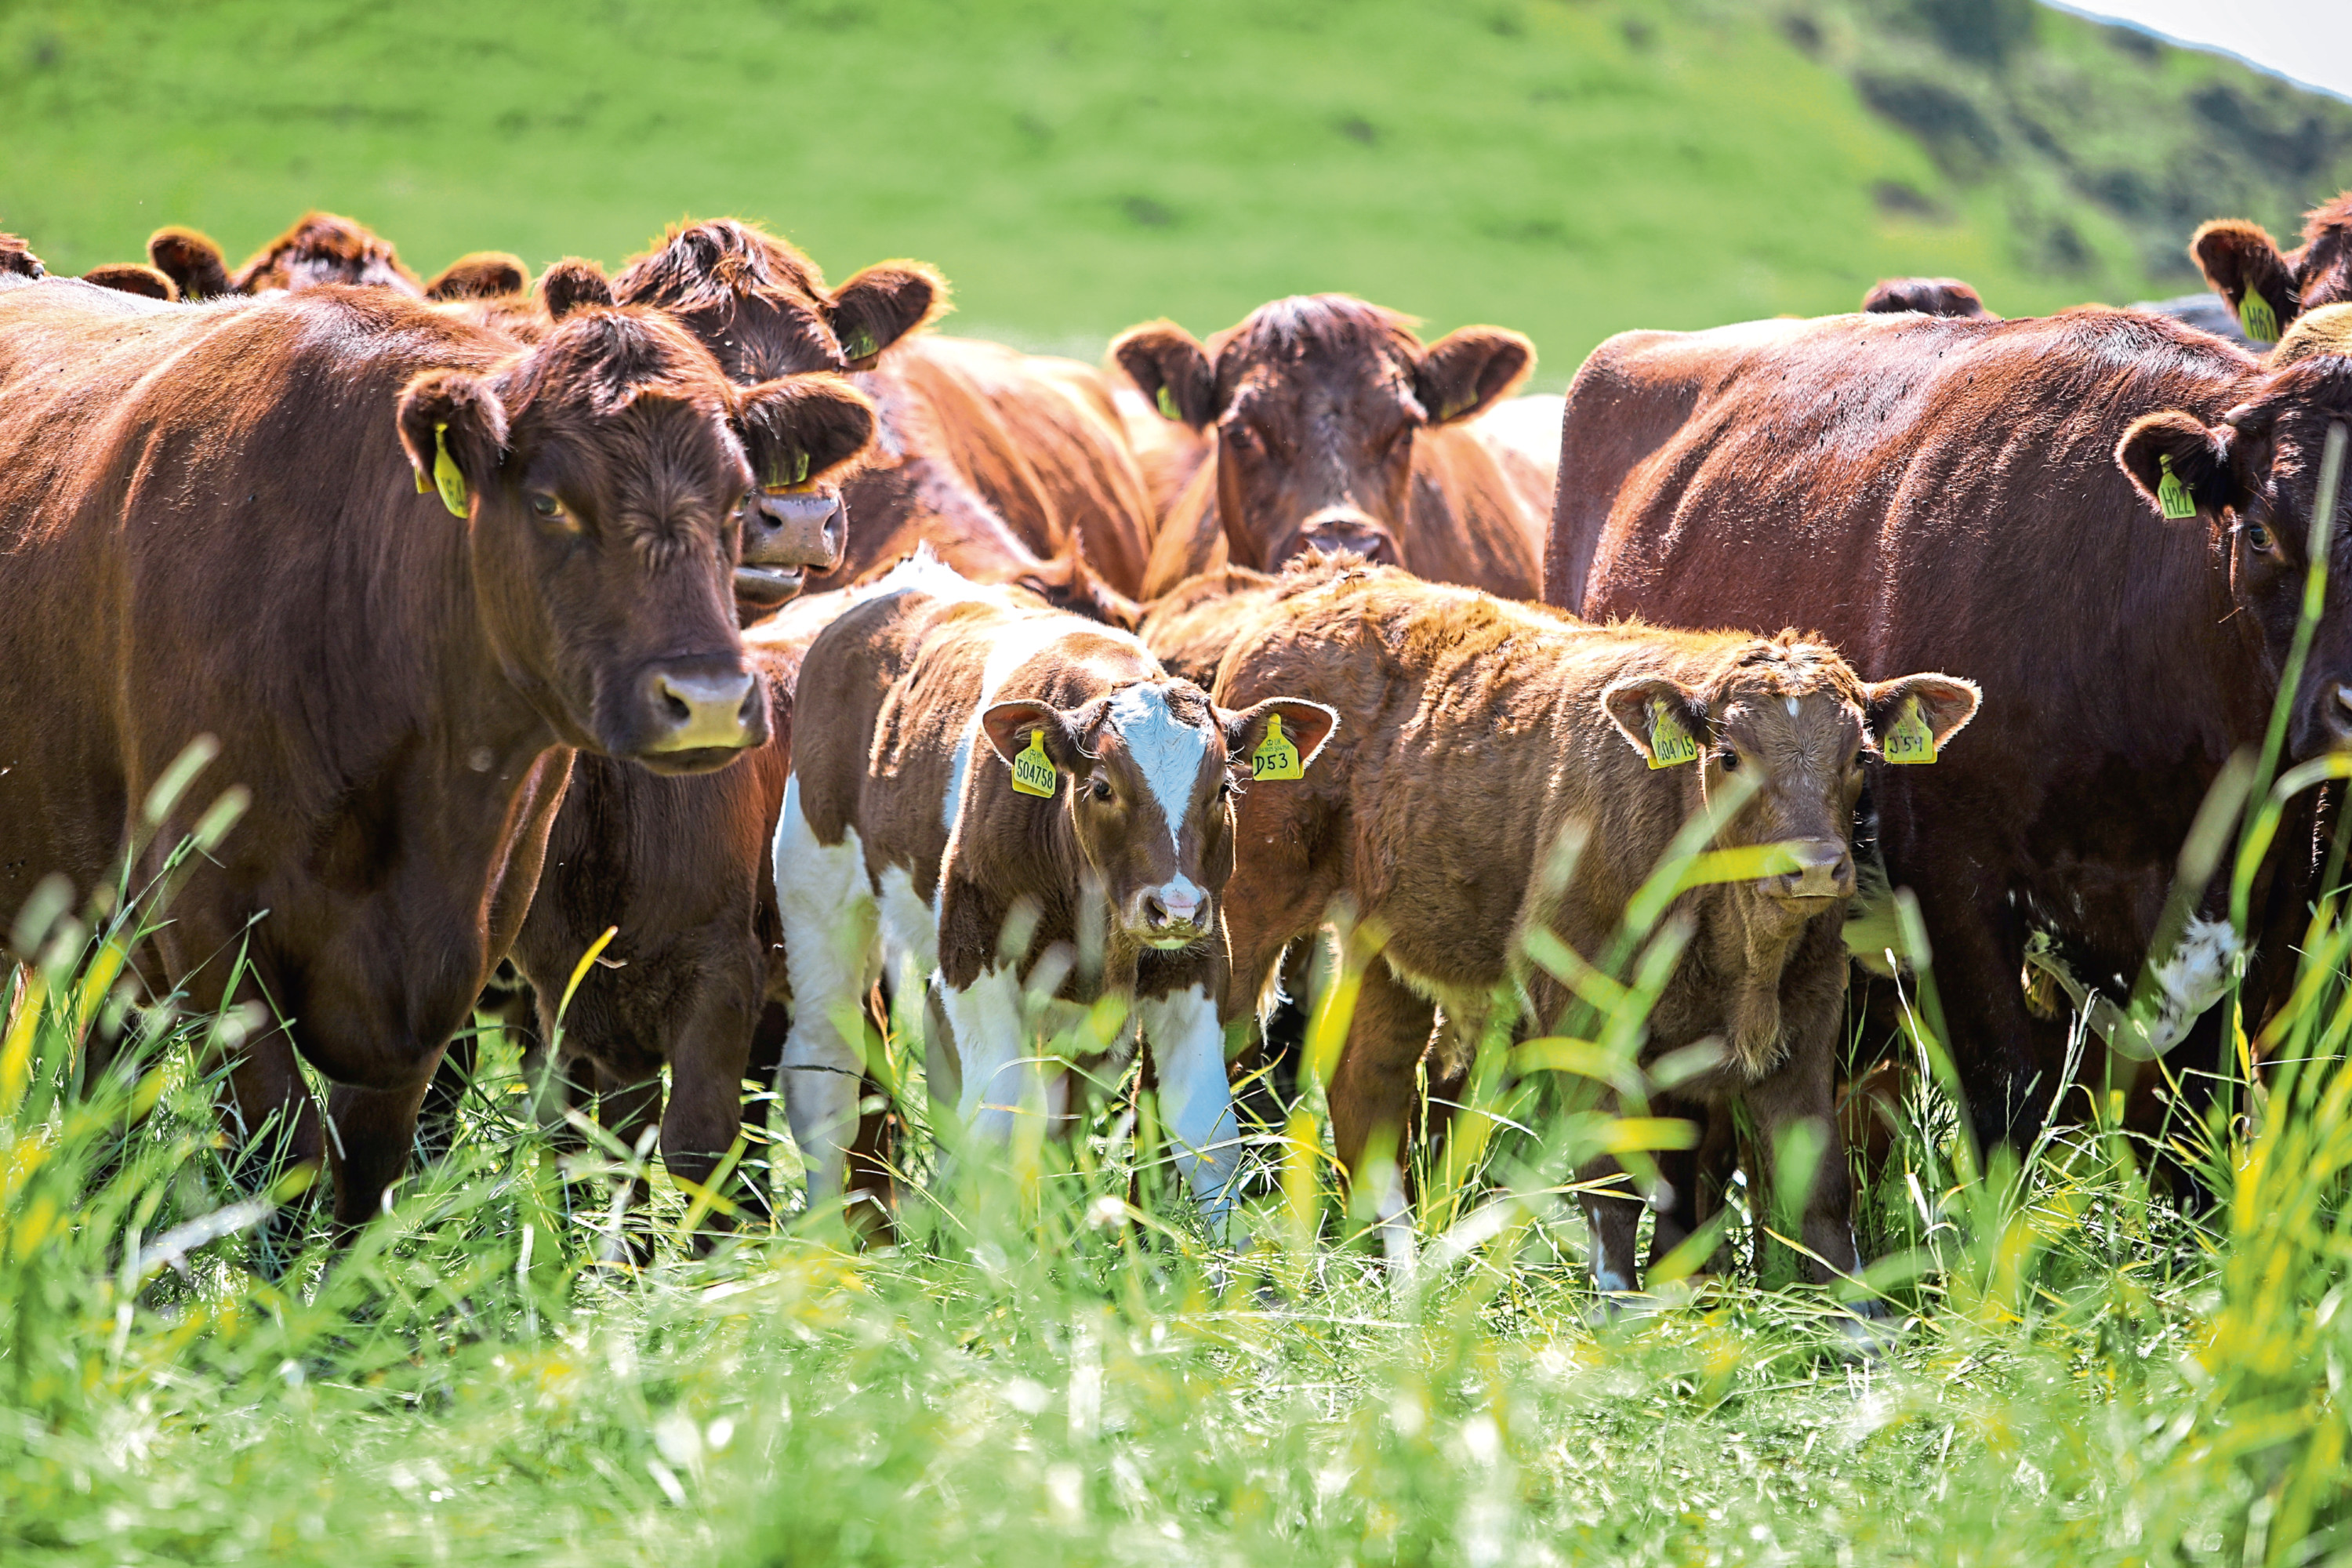 Courier - Features - Nancy Nicolson - Luing Cattle Open Day story - CR0011365 - Anstruther - Picture Shows: Herd of Luing Cattle in field. Balcaskie Estate will be hosting the Luing Cattle Society open day this month. - Monday 8th July 2019 - Steve Brown / DCT Media